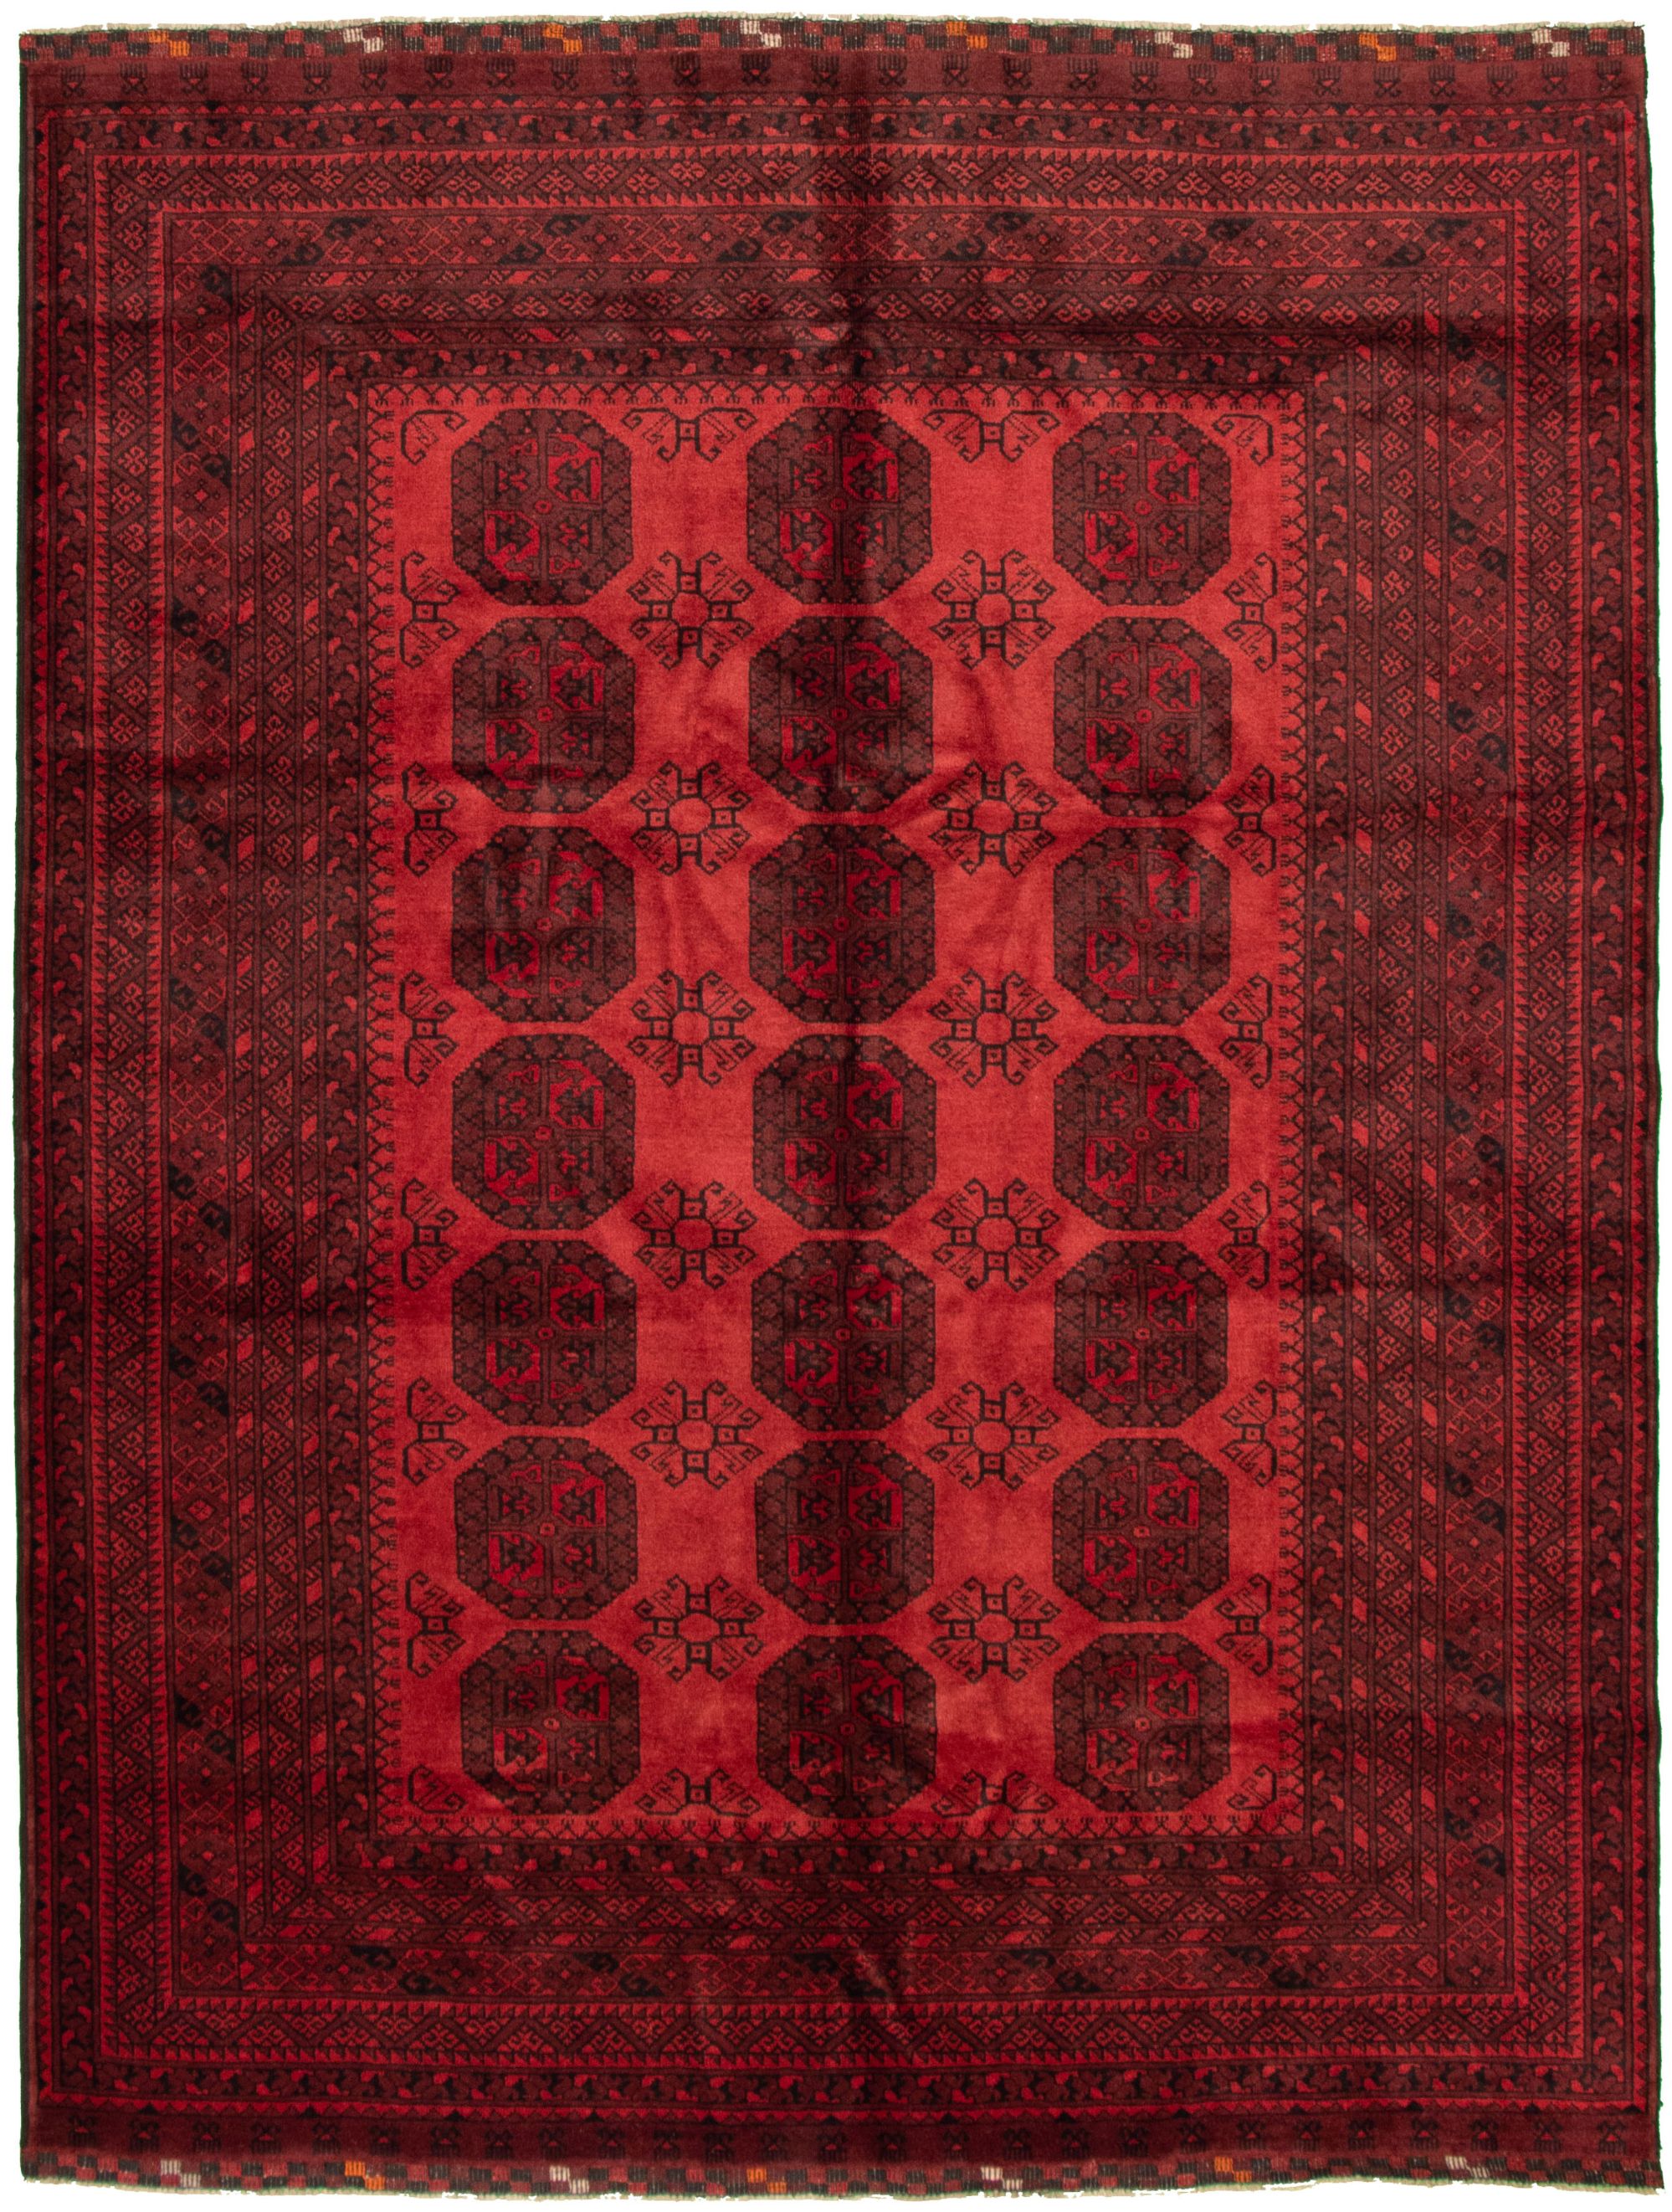 Hand-knotted Khal Mohammadi Red Wool Rug 6'9" x 8'10" Size: 6'9" x 8'10"  